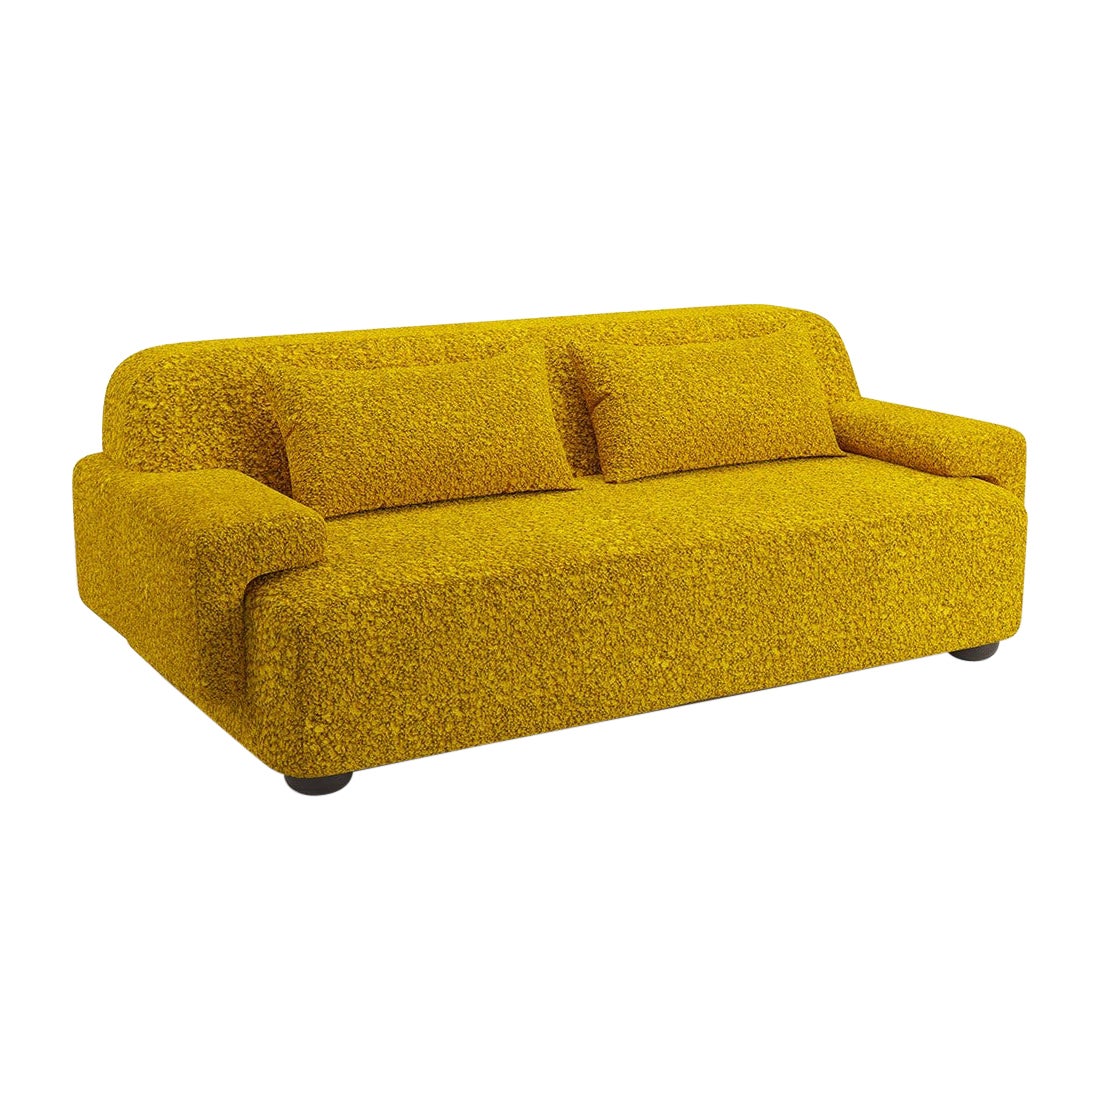 Popus Editions Lena 3 Seater Sofa in Amber Athena Loop Yarn Upholstery For Sale